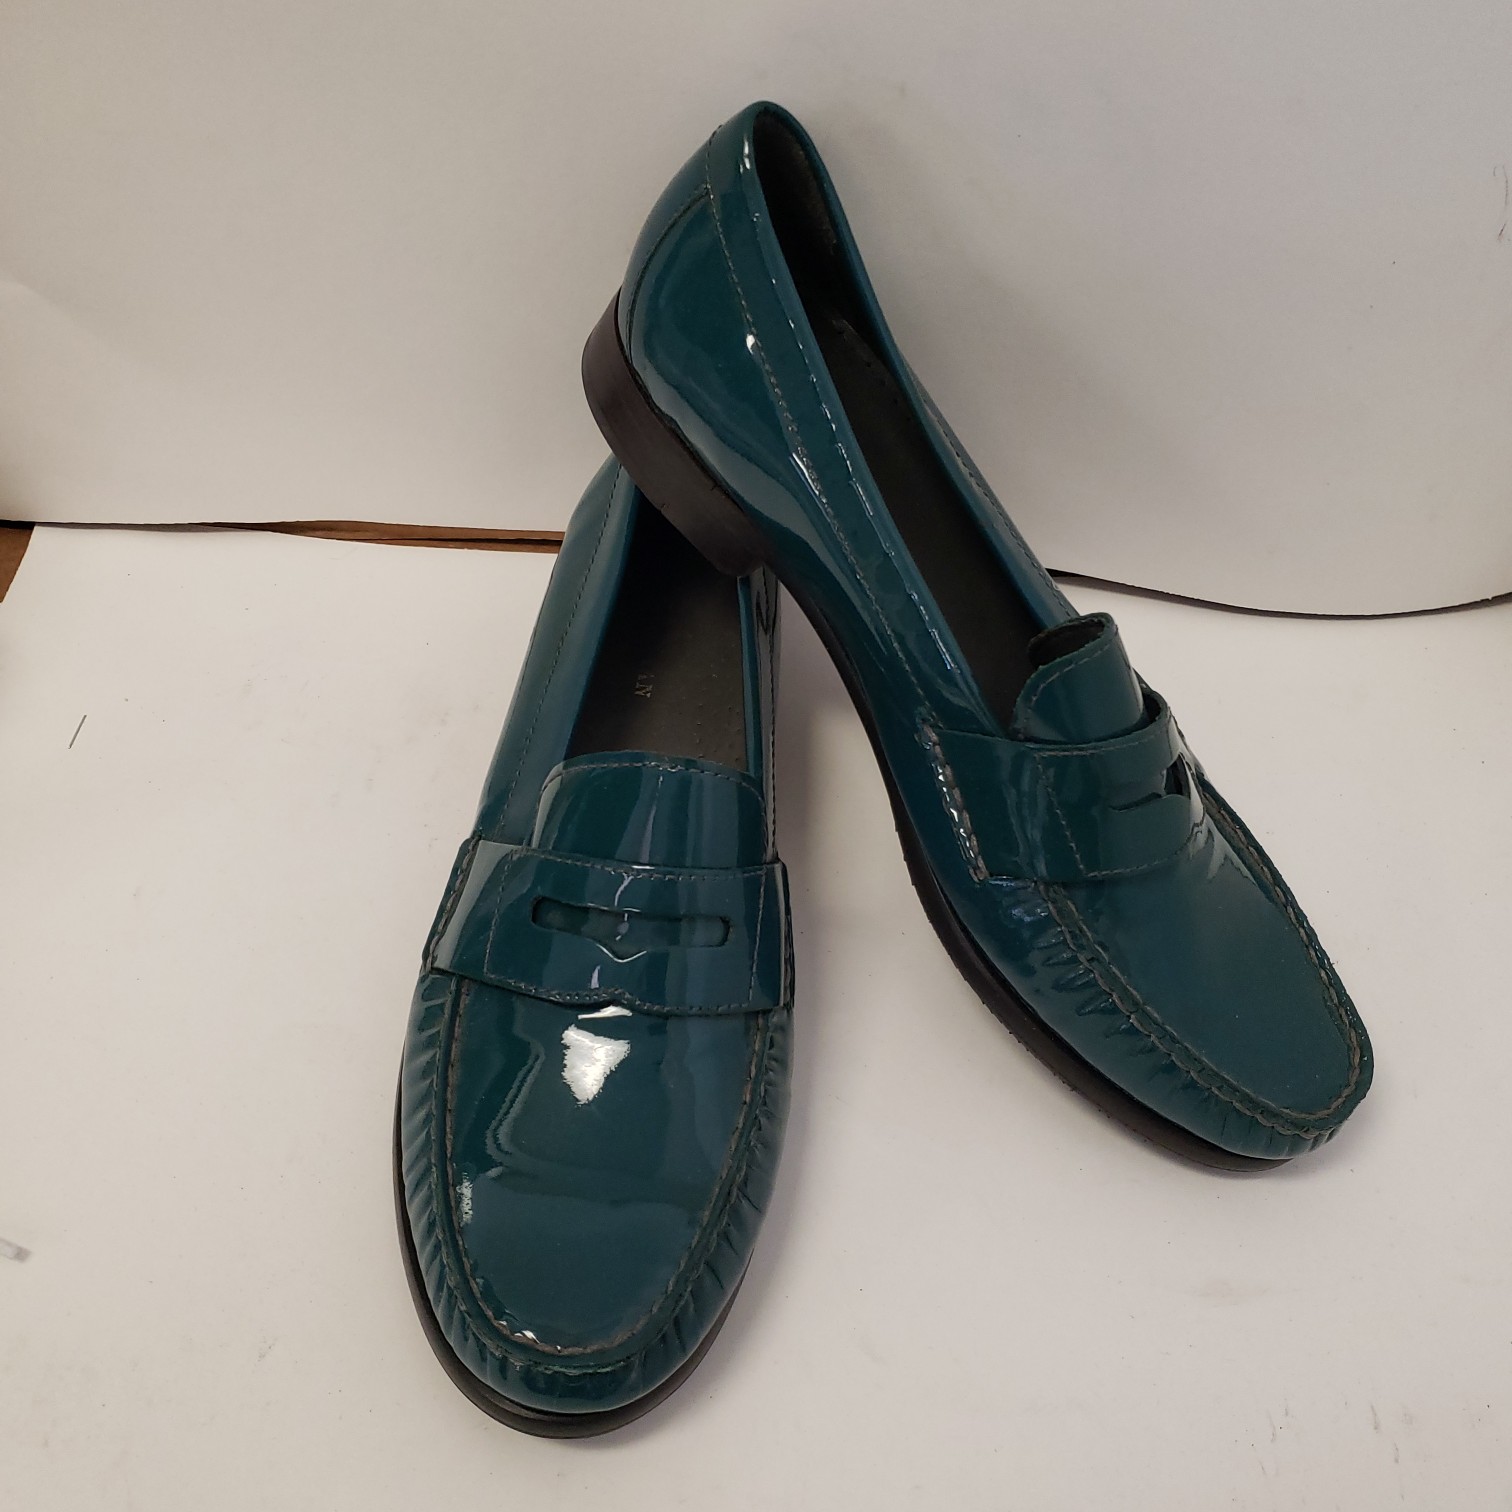 Buy the Mens Teal Patent Leather Slip On Casual Loafer Shoes ...